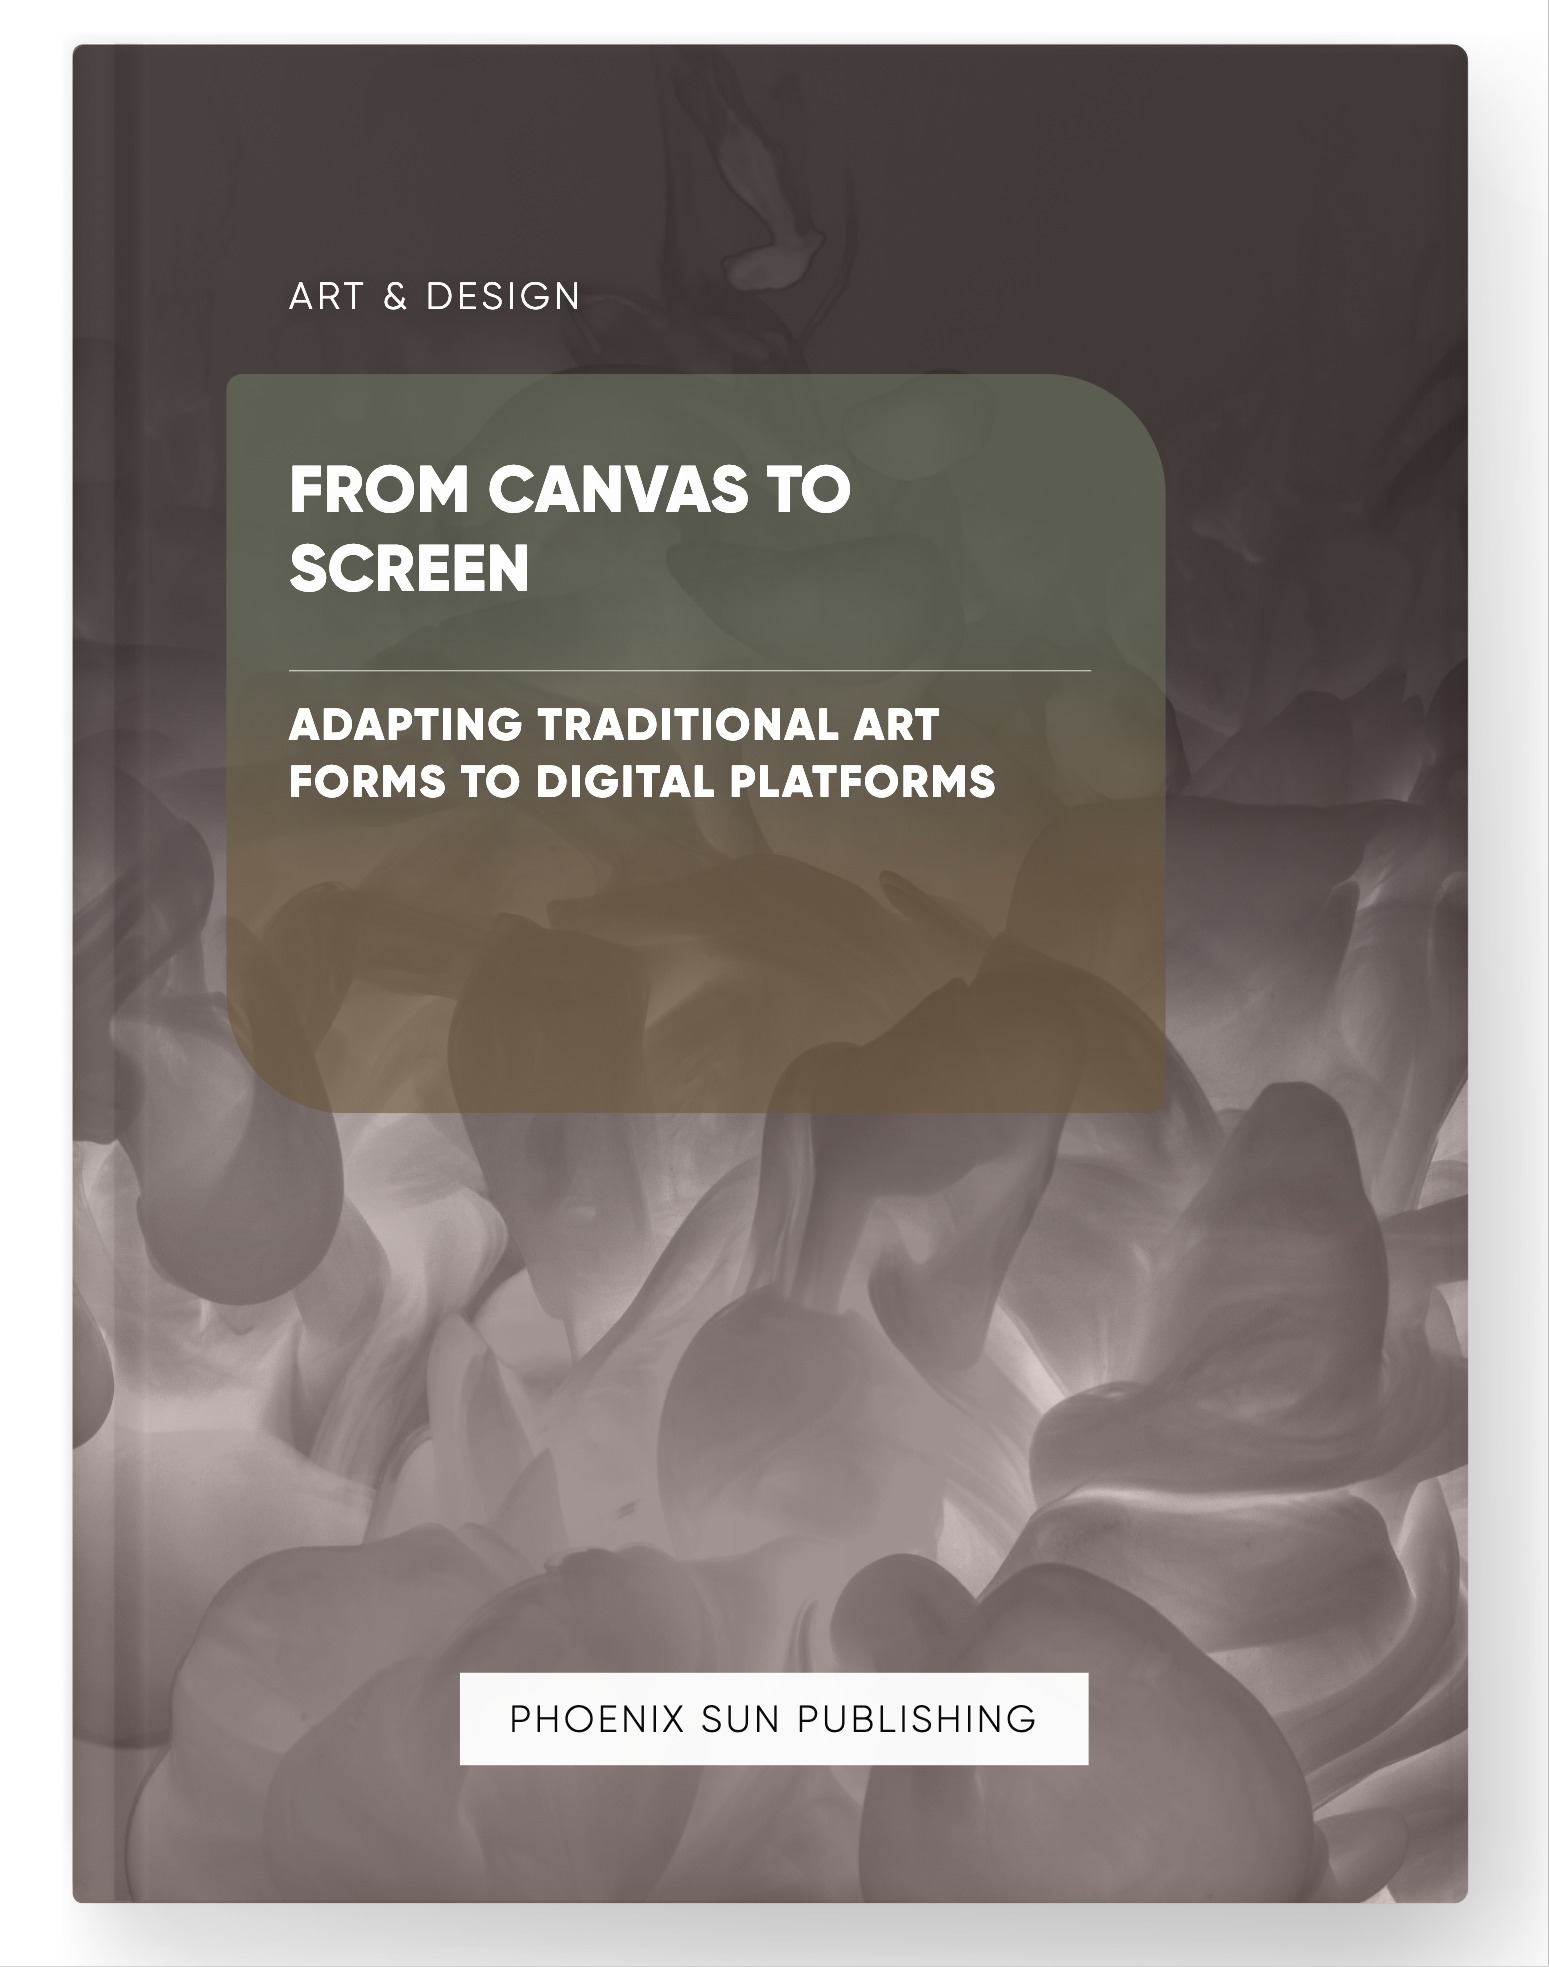 From Canvas to Screen – Adapting Traditional Art Forms to Digital Platforms